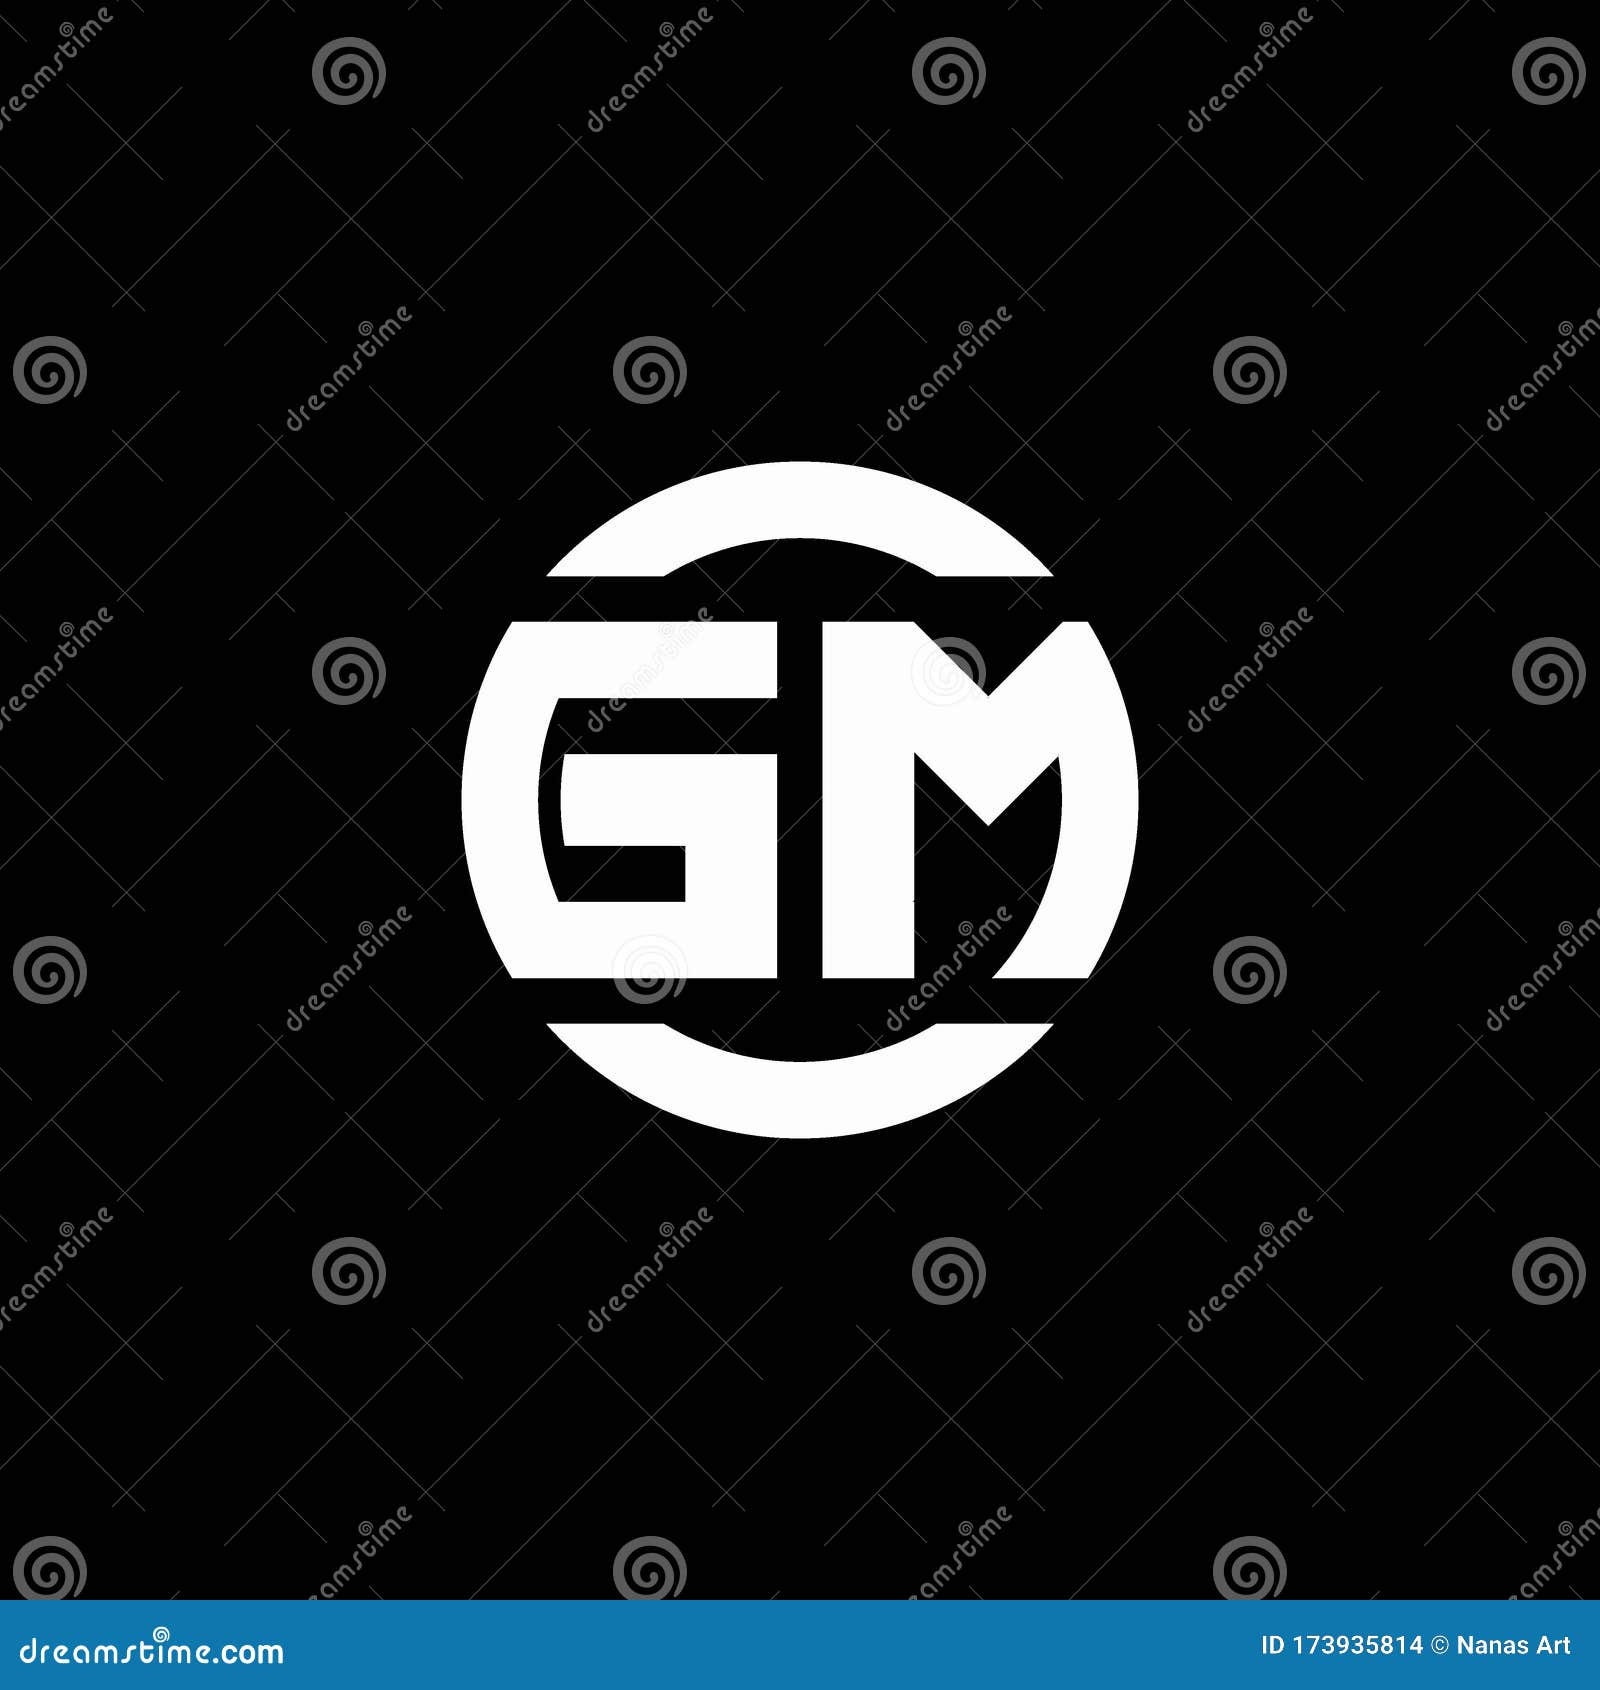 Gm logo monogram with shield shape isolated Vector Image